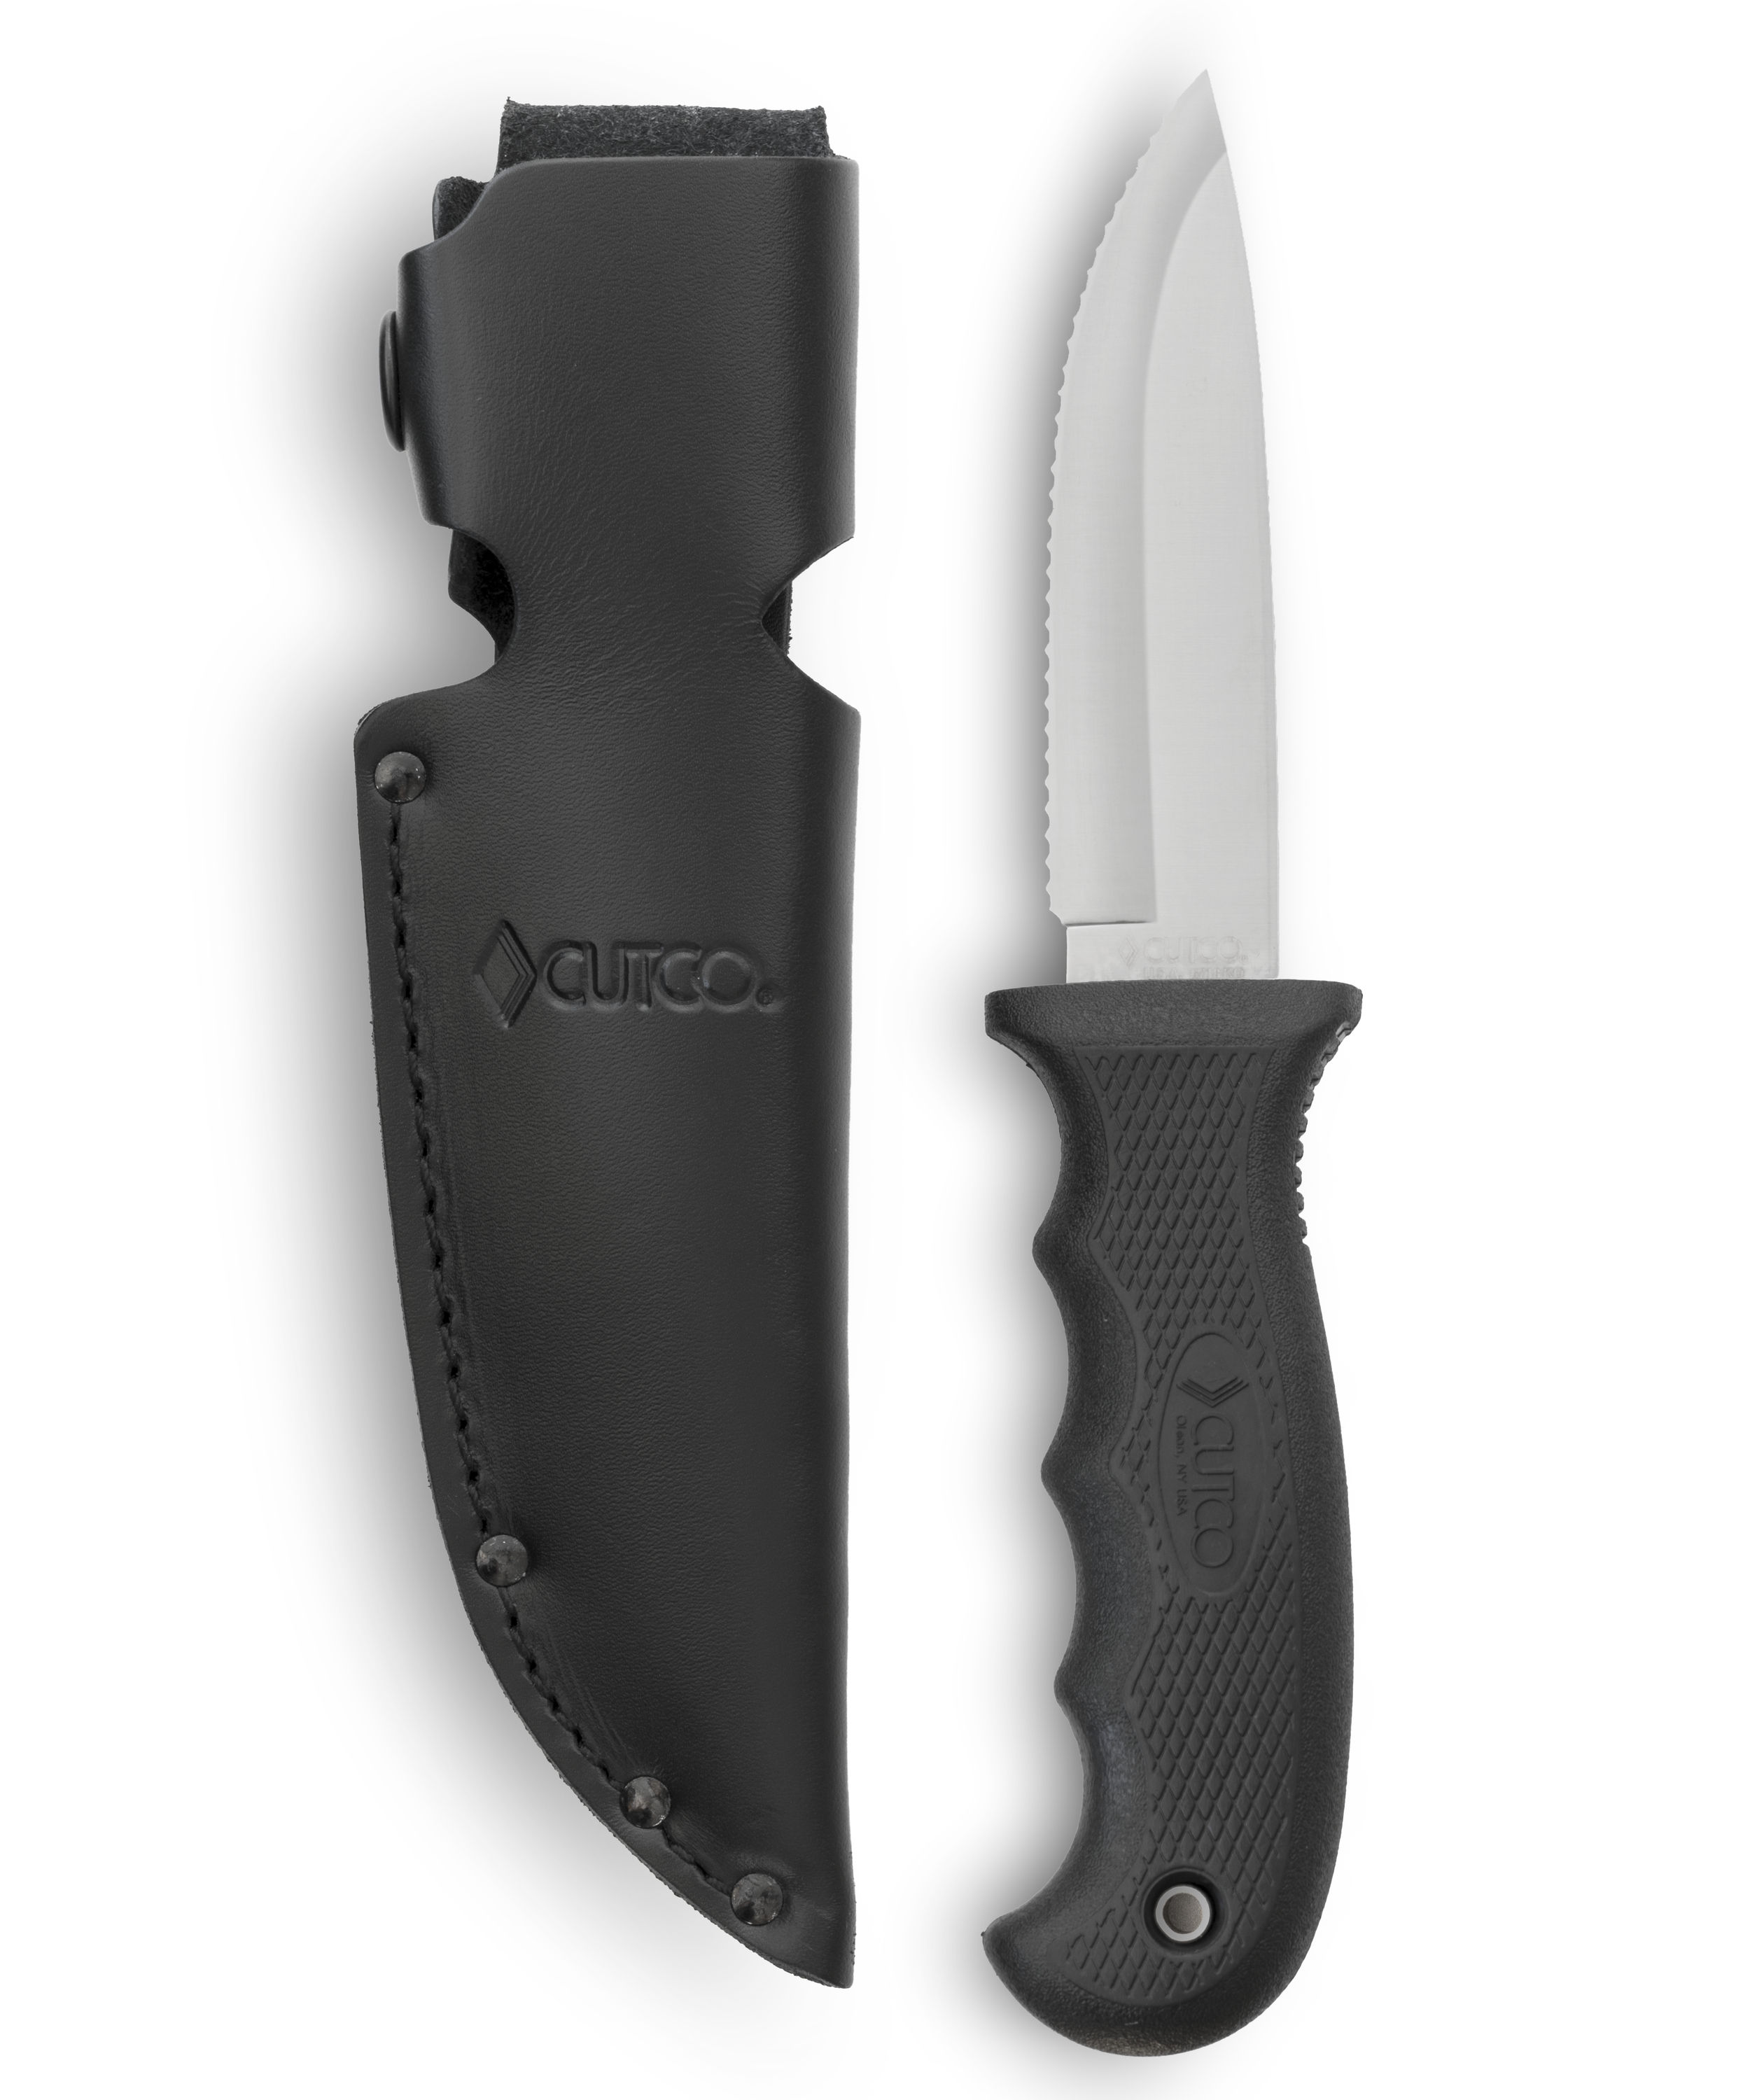  CUTCO Model 5718 Black Drop Point Knife with Double-D